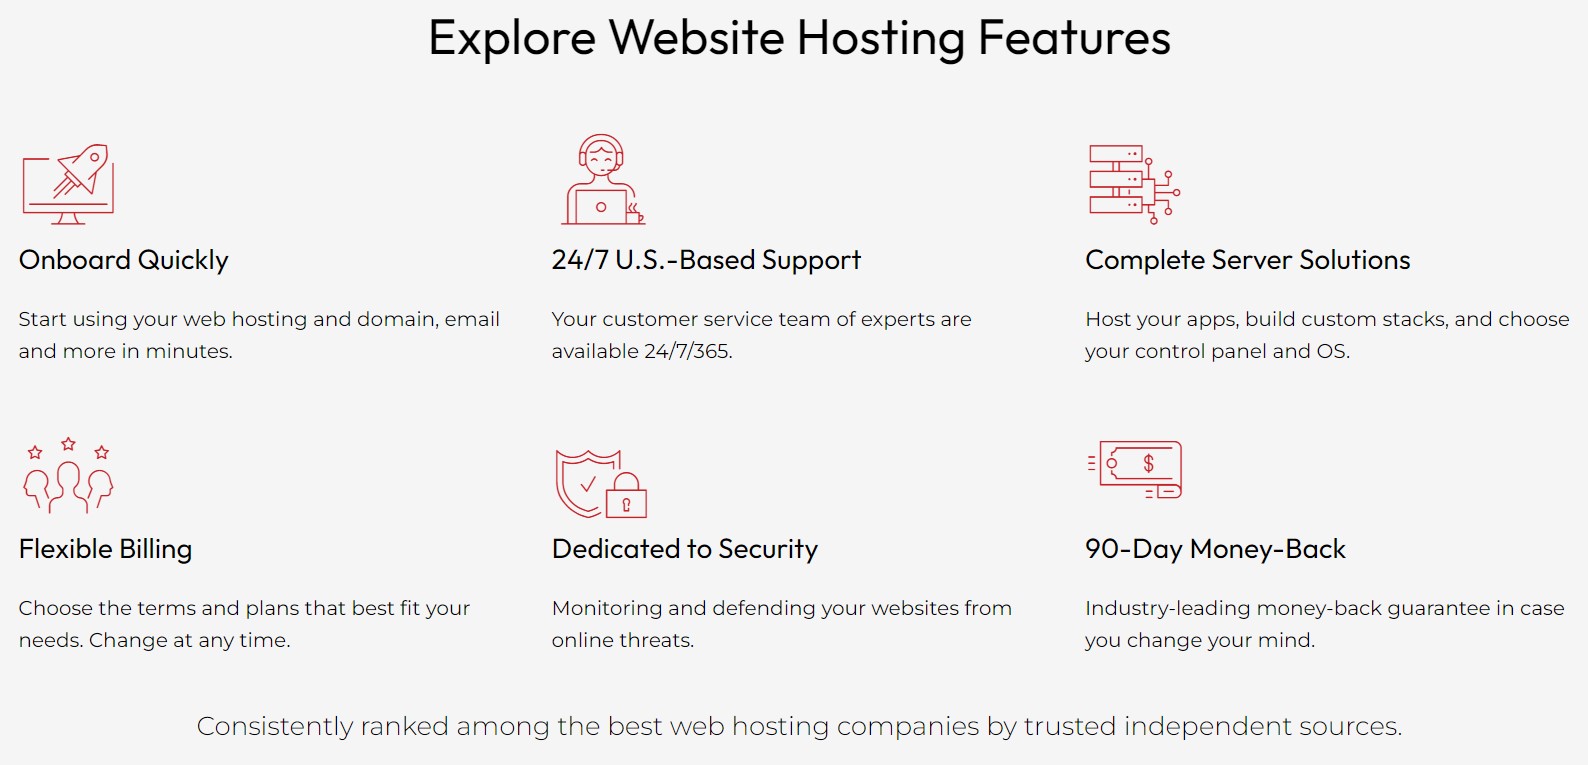 InMotion Hosting shared hosting features